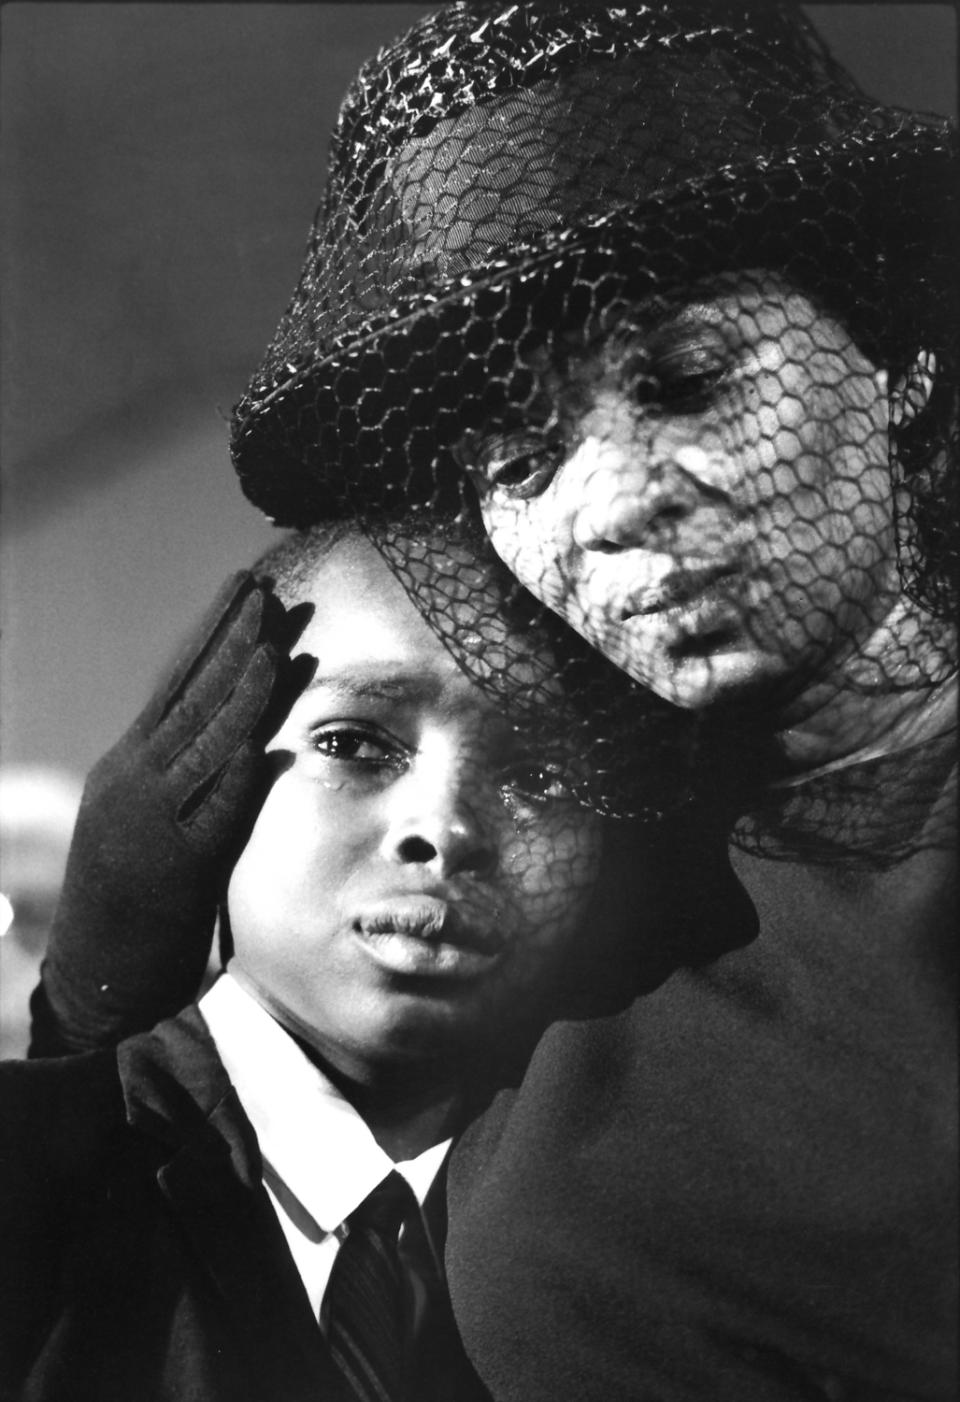 This 1964 photo taken by Bill Eppridge and released courtesy of Monroe Gallery shows Fannie Lee Chaney, right, and her son Ben Chaney at the funeral for her older son James Earl Chaney, in Meridian, Miss. James Earl Chaney, 21, was one of three American civil rights workers who were murdered during Freedom Summer. Photojournalist Bill Eppridge, whose legendary career included capturing images of a mortally wounded Robert Kennedy, the Beatles and the civil rights movement, died Thursday, Oct. 3, 2013 in Danbury, Conn., after a brief illness. He was 75. (AP Photo/Monroe Gallery, Bill Eppridge)